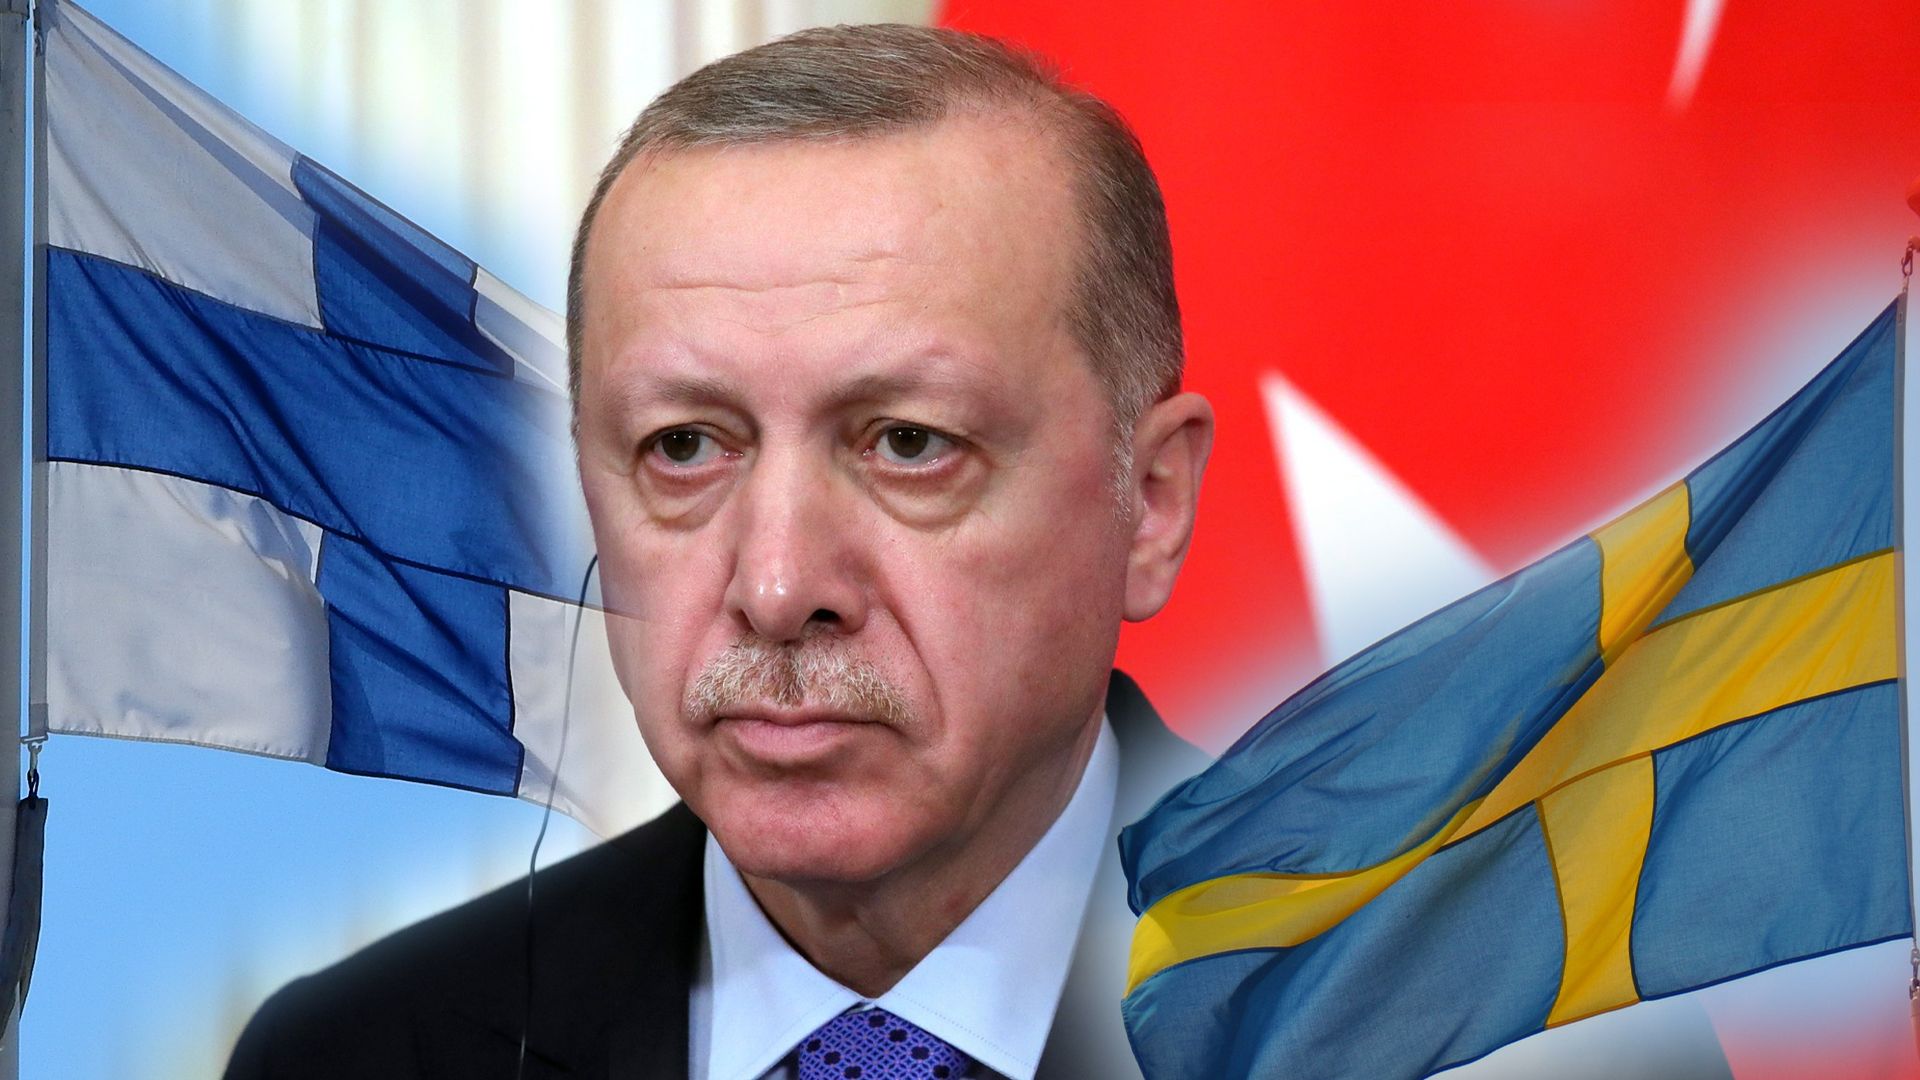 Sweden refused to investigate action related to Erdogan's puppet